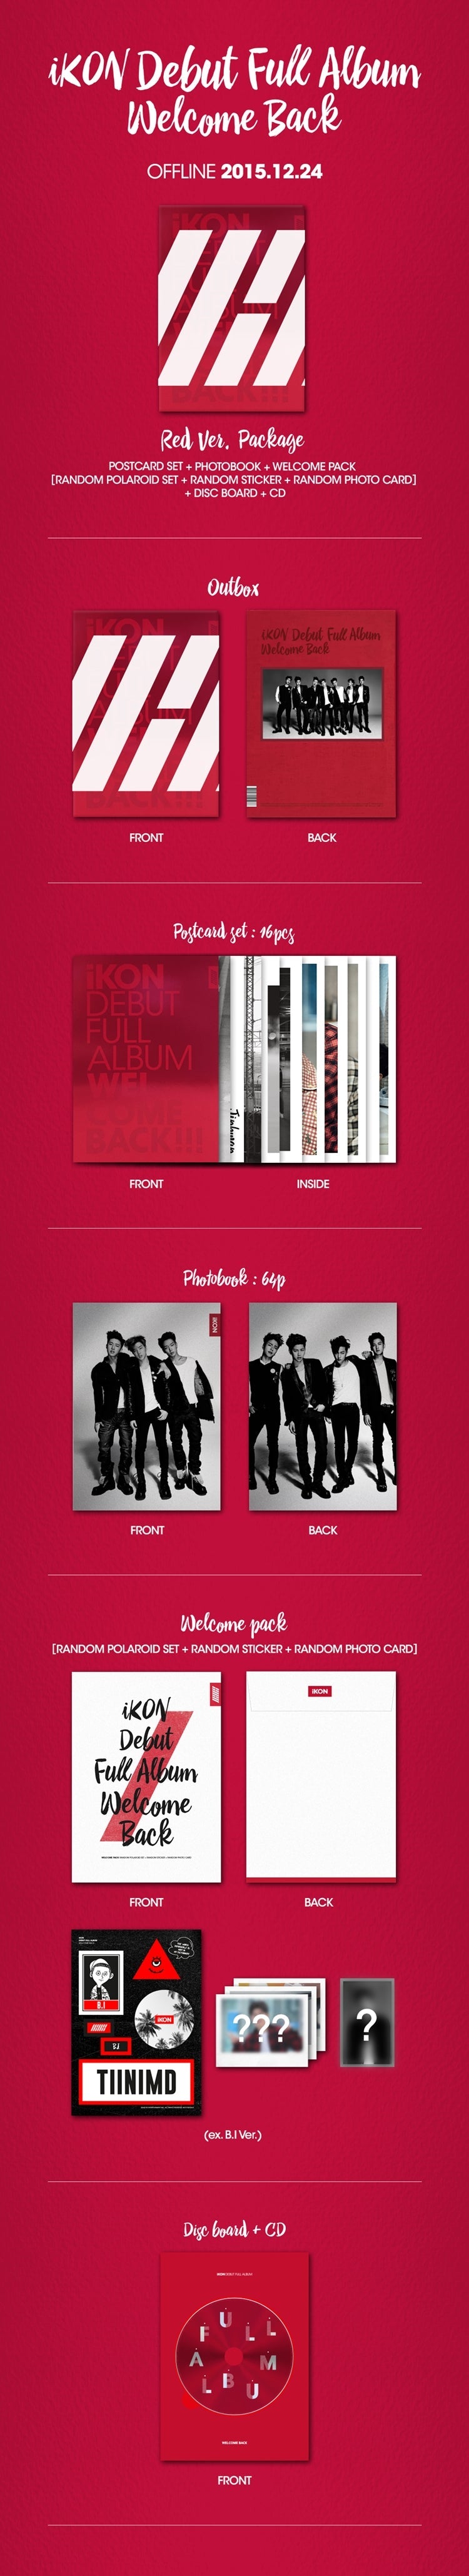 1 CD
1 Photo Book (64 pages)
16 Big Post Cards
1 Sticker
1 Photo Card
3 Polaroids